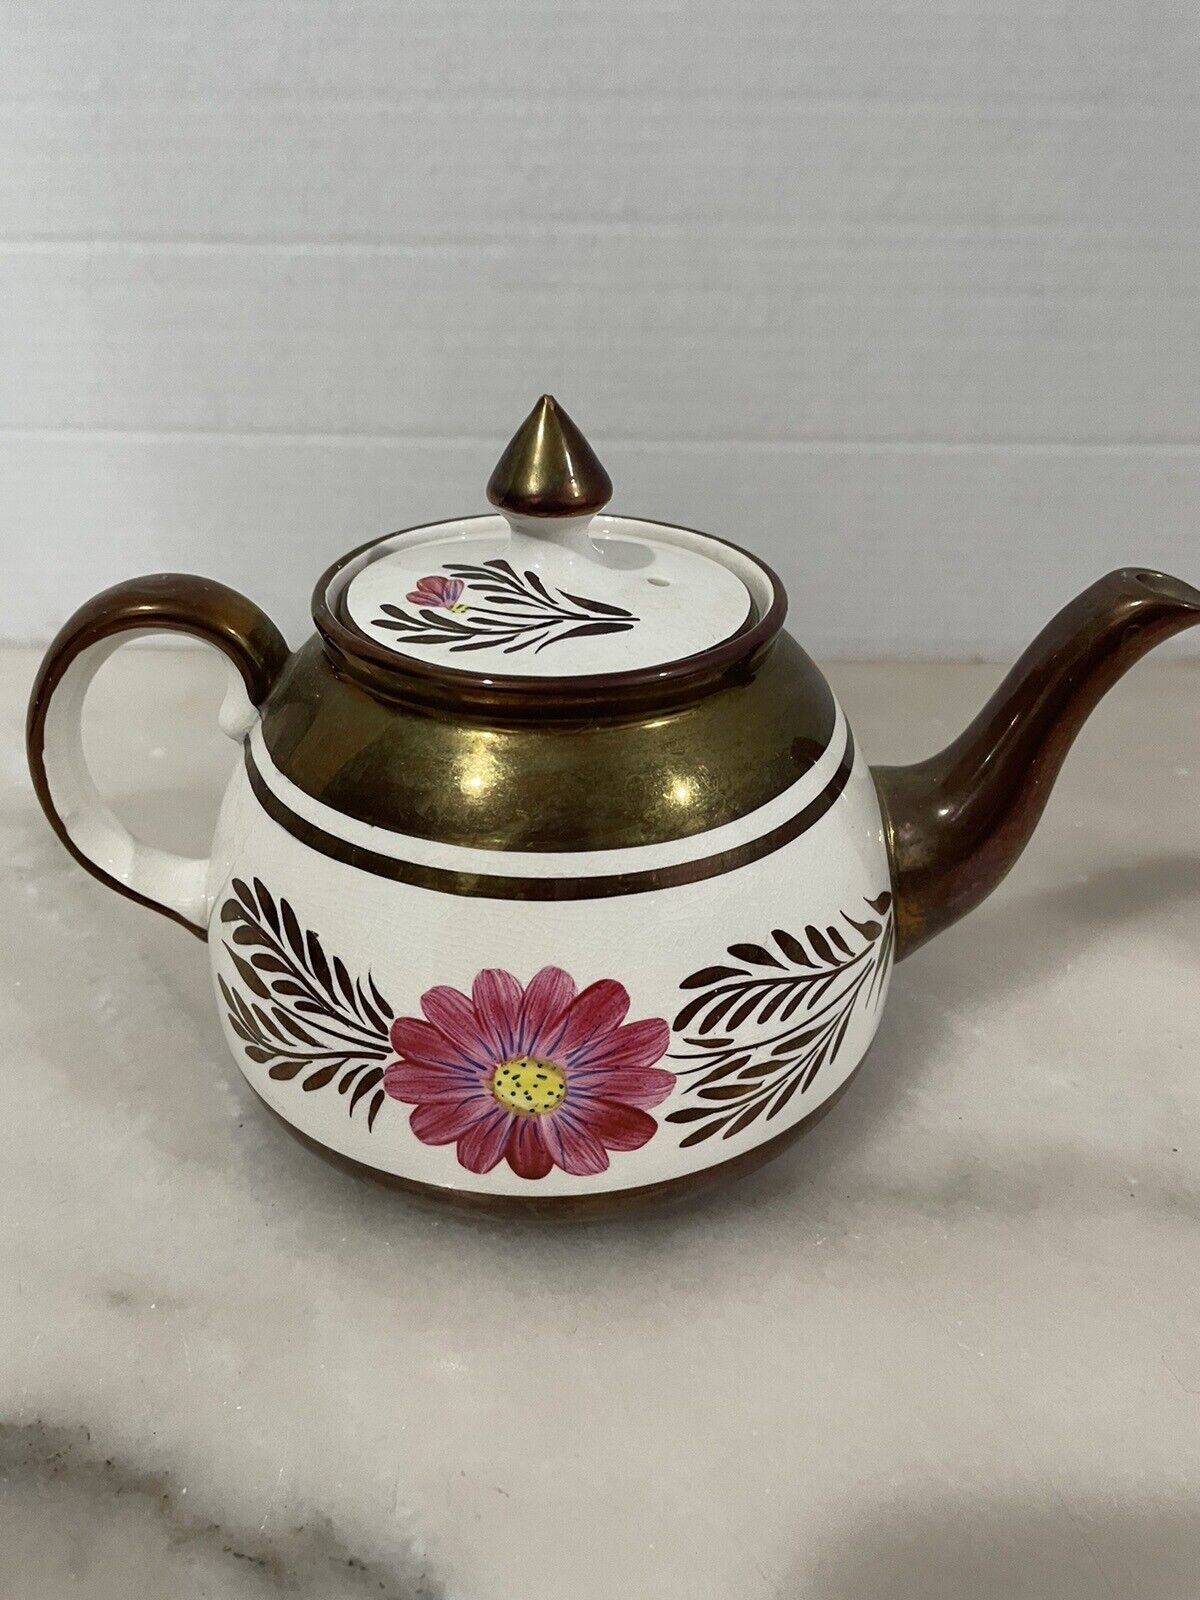 Vintage Gibsons England Teapot Gold Pink Flowers 4 Cup